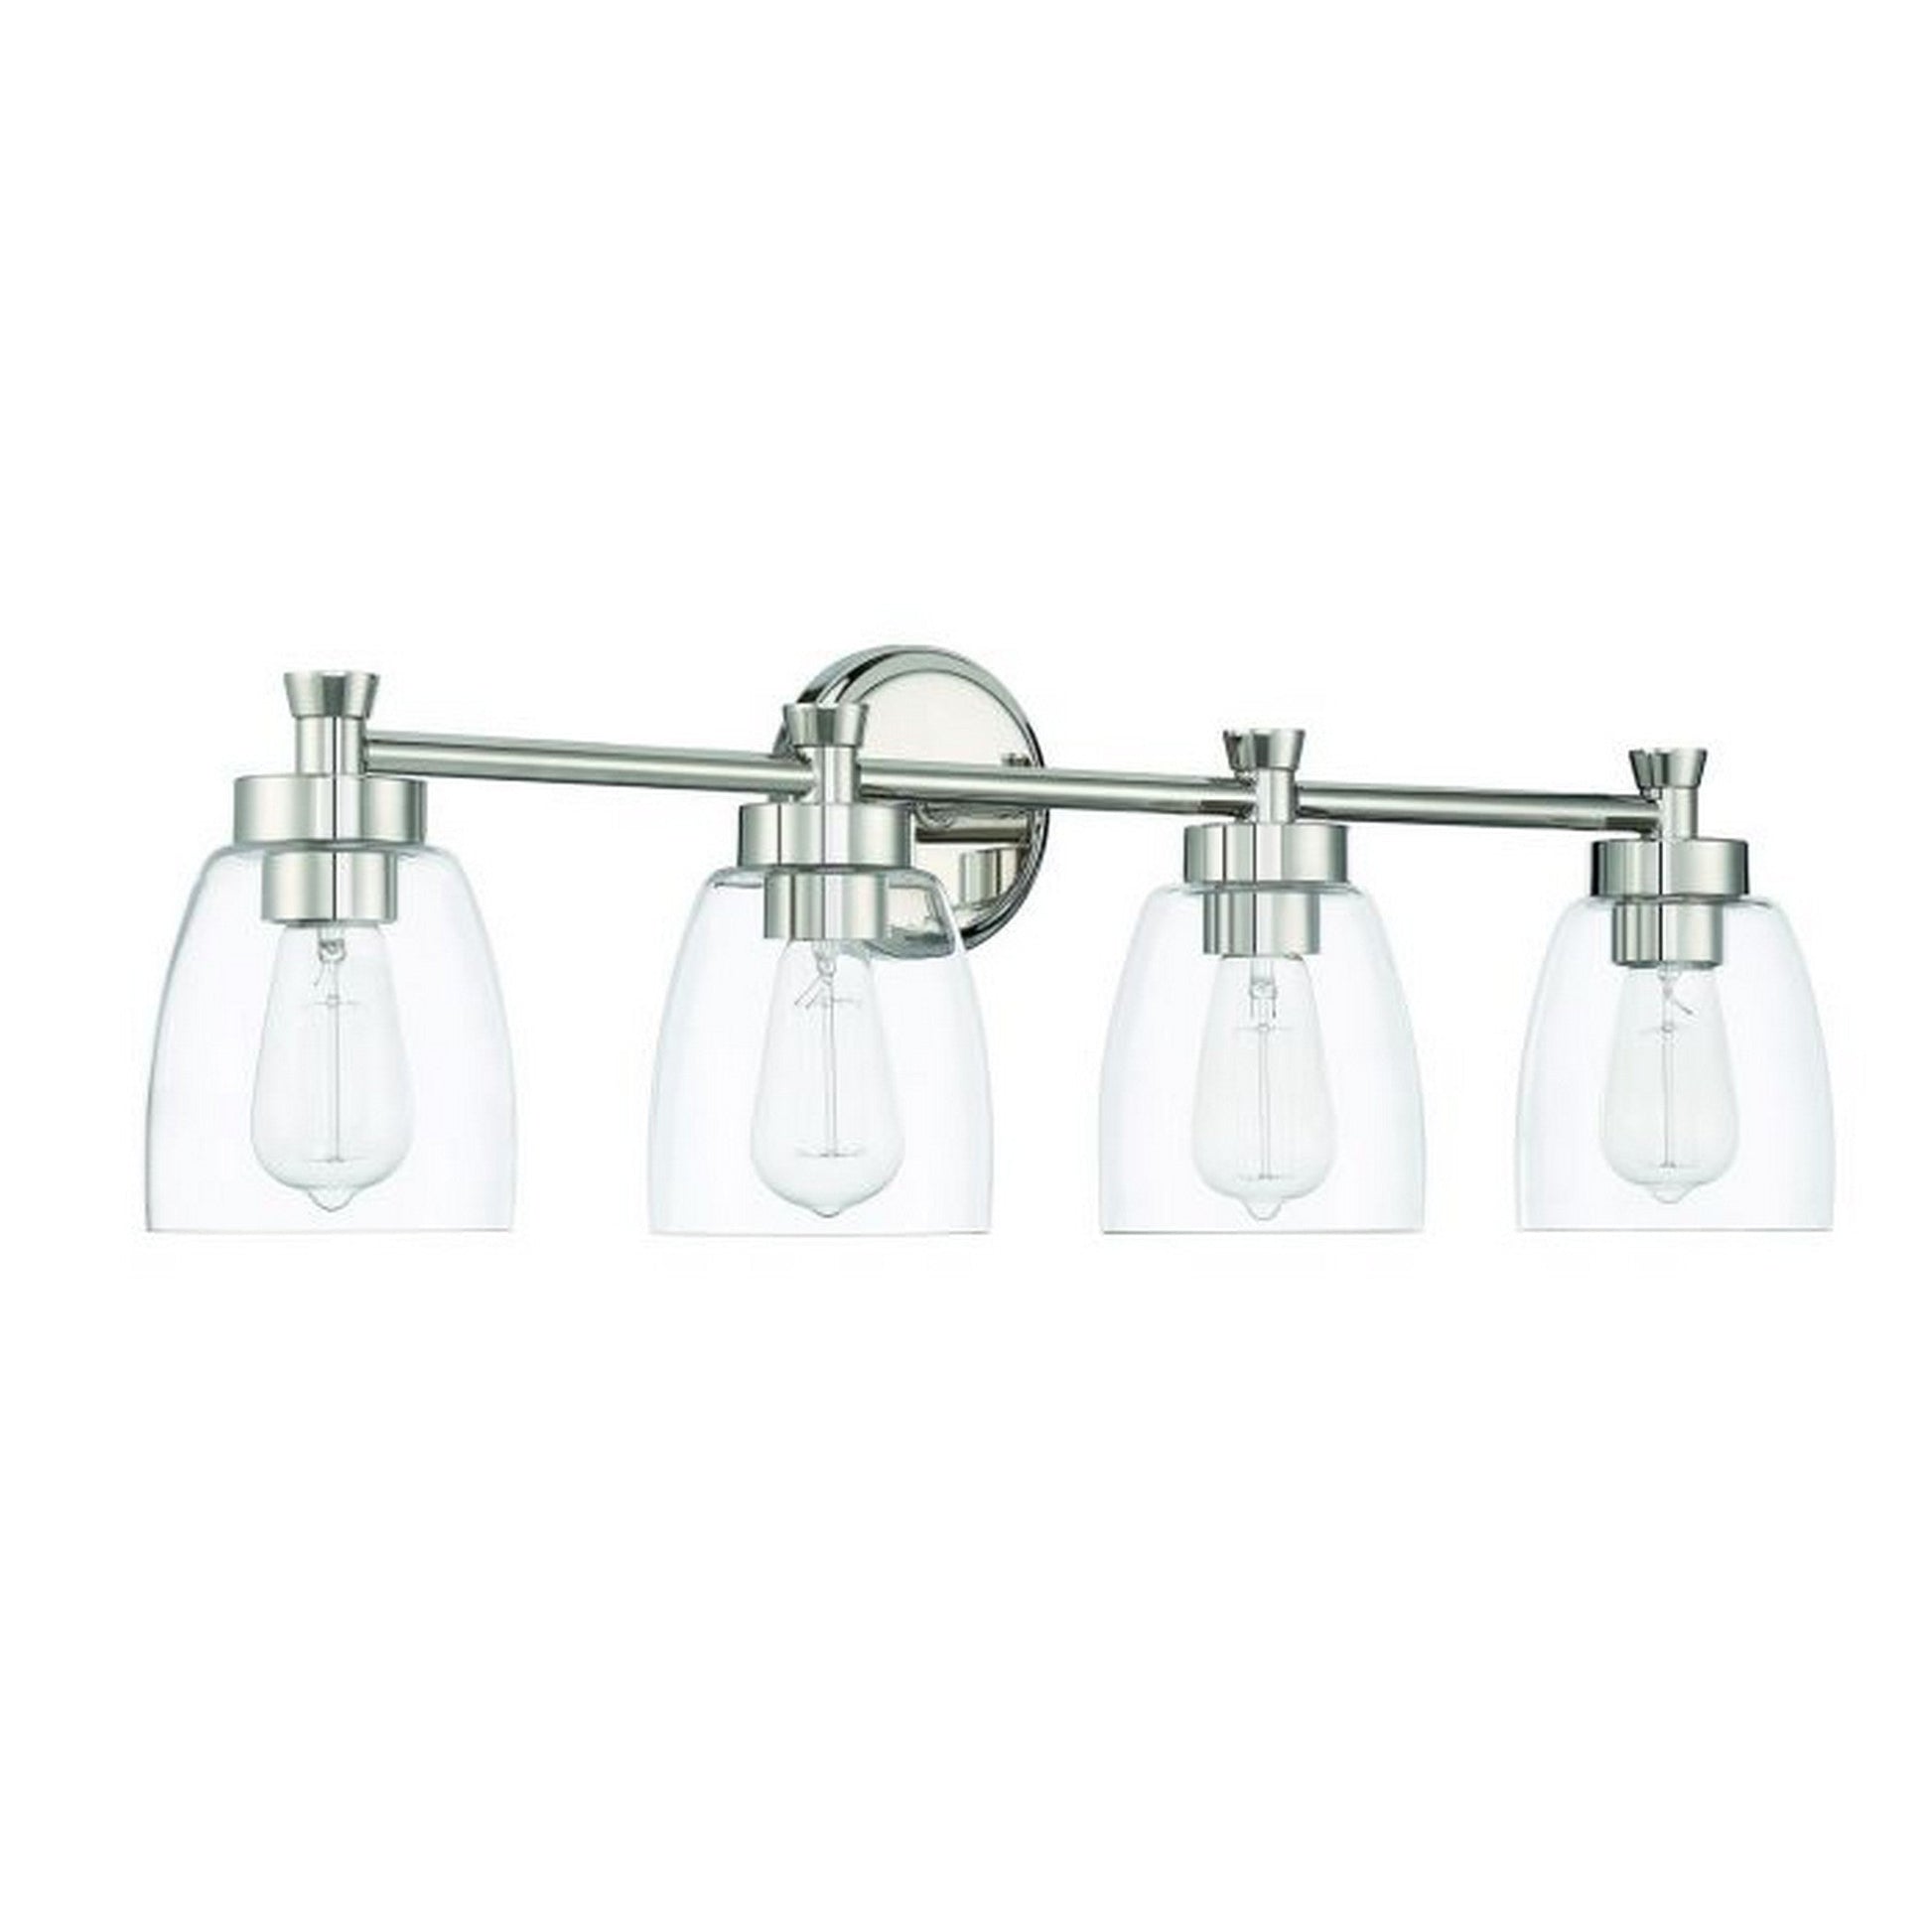 Craftmade Henning 30" 4-Light Polished Nickel Vanity Light With Clear Glass Shades